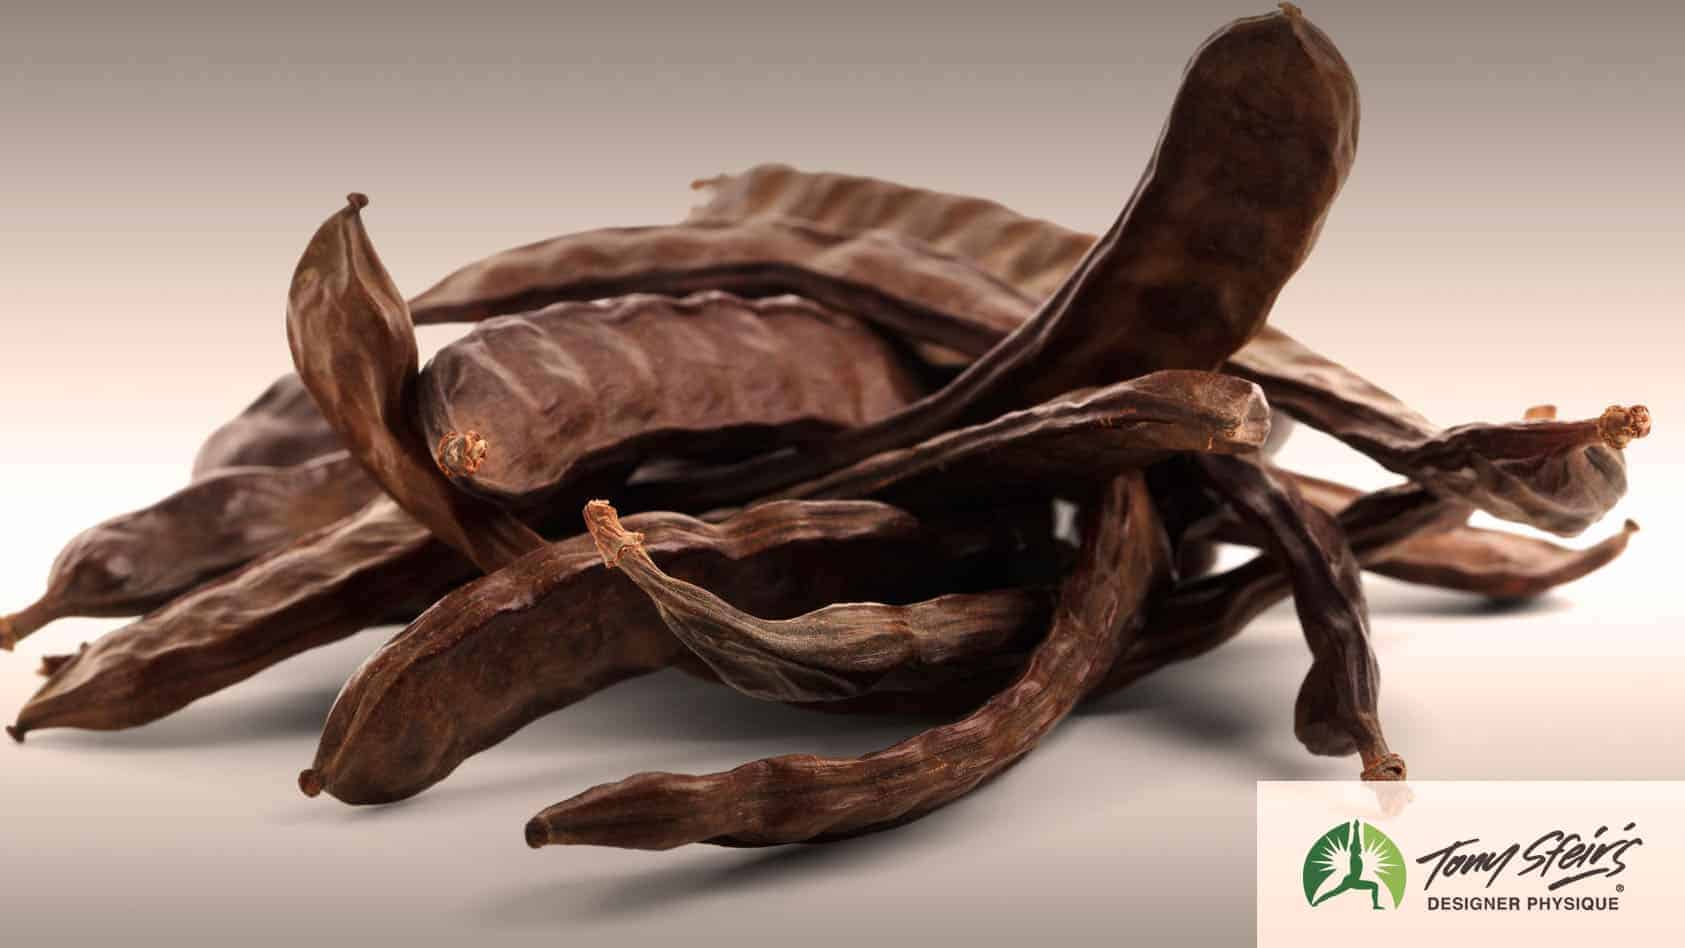 Carob: 4 Reasons Why You Should Use This Nutrient-Dense, High-Protein, Functional Superfood.